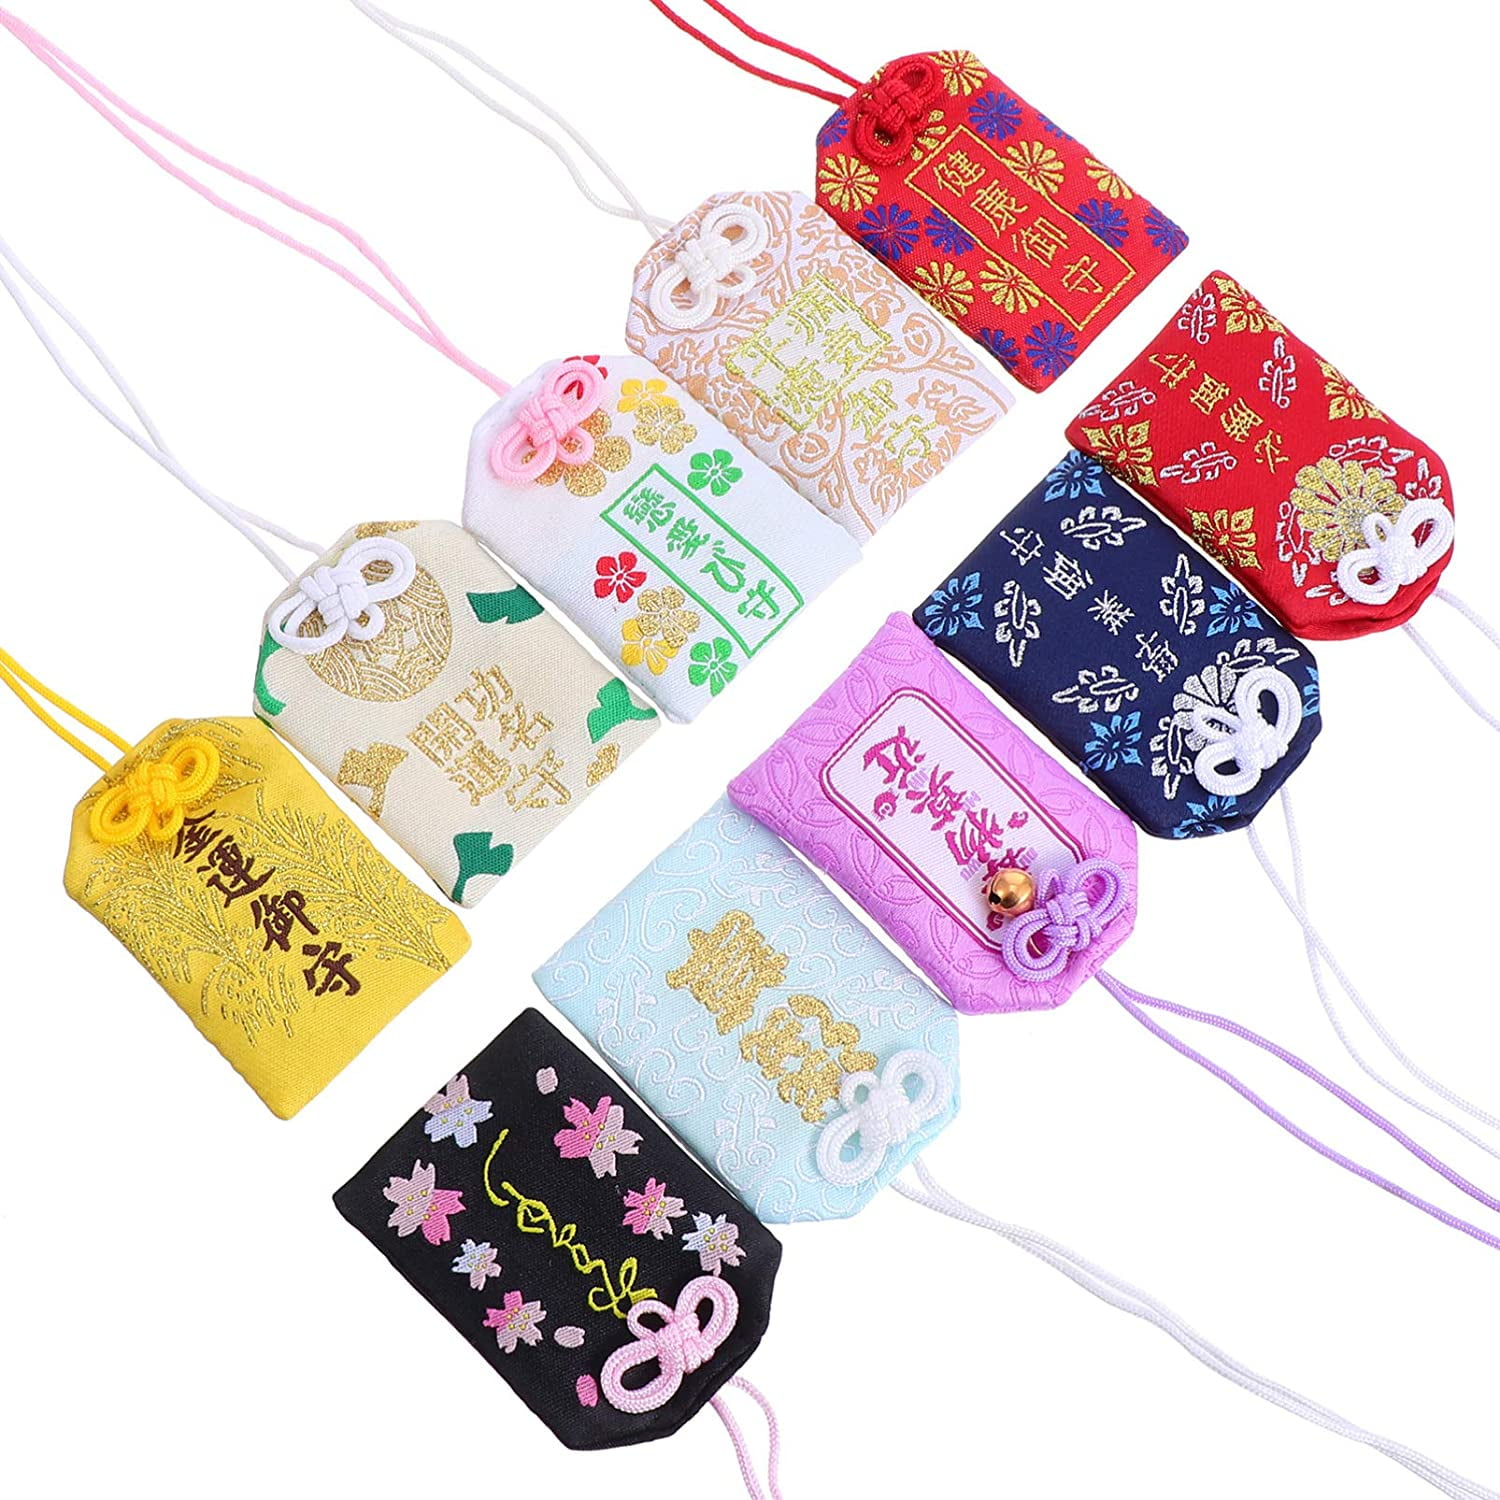 Japanese Omamori Amulet Lucky Charm Good Luck Charm for Good Fortune Economic Fortune 